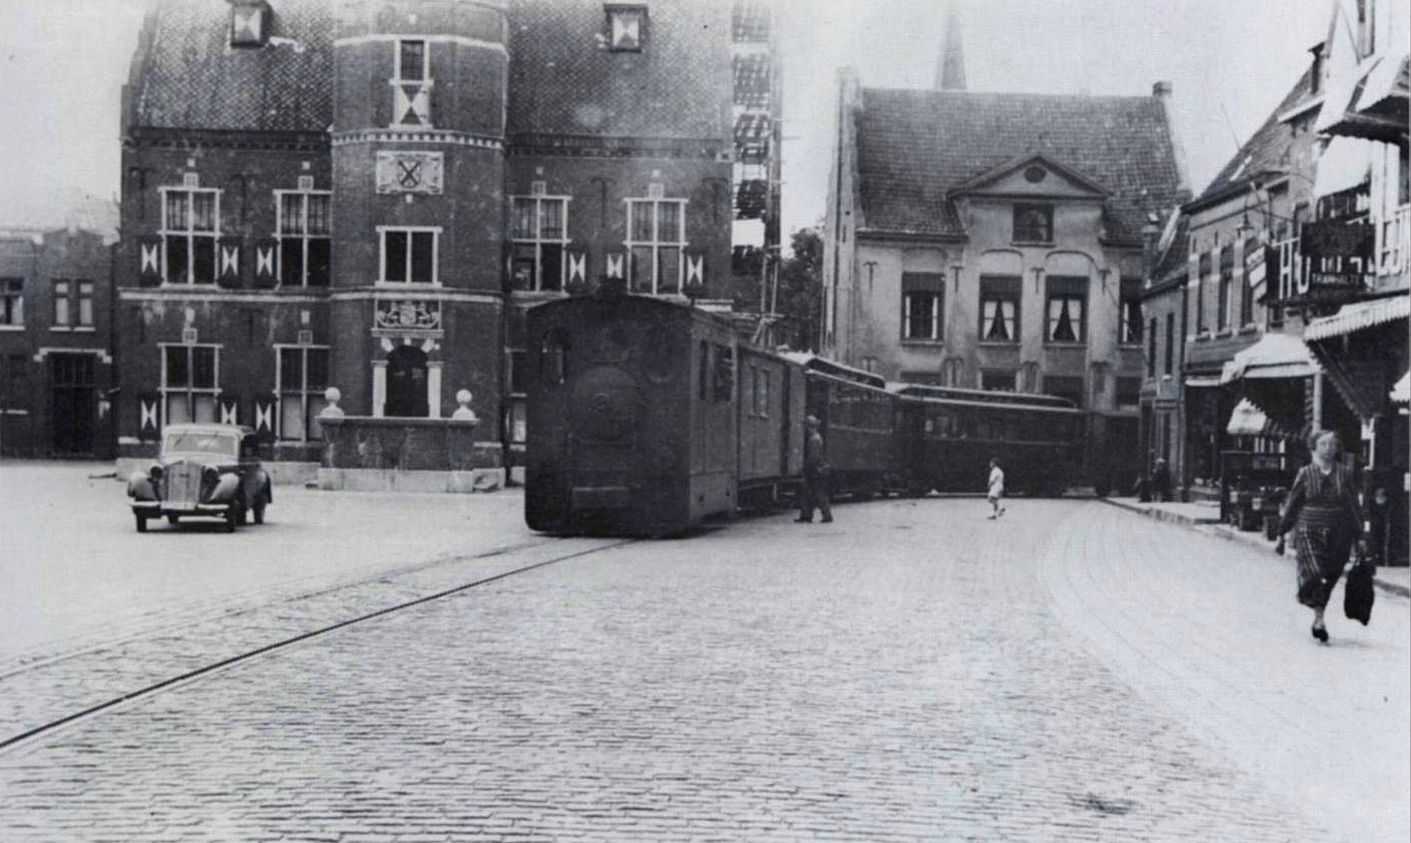 mbs-stationGennep1940-1945